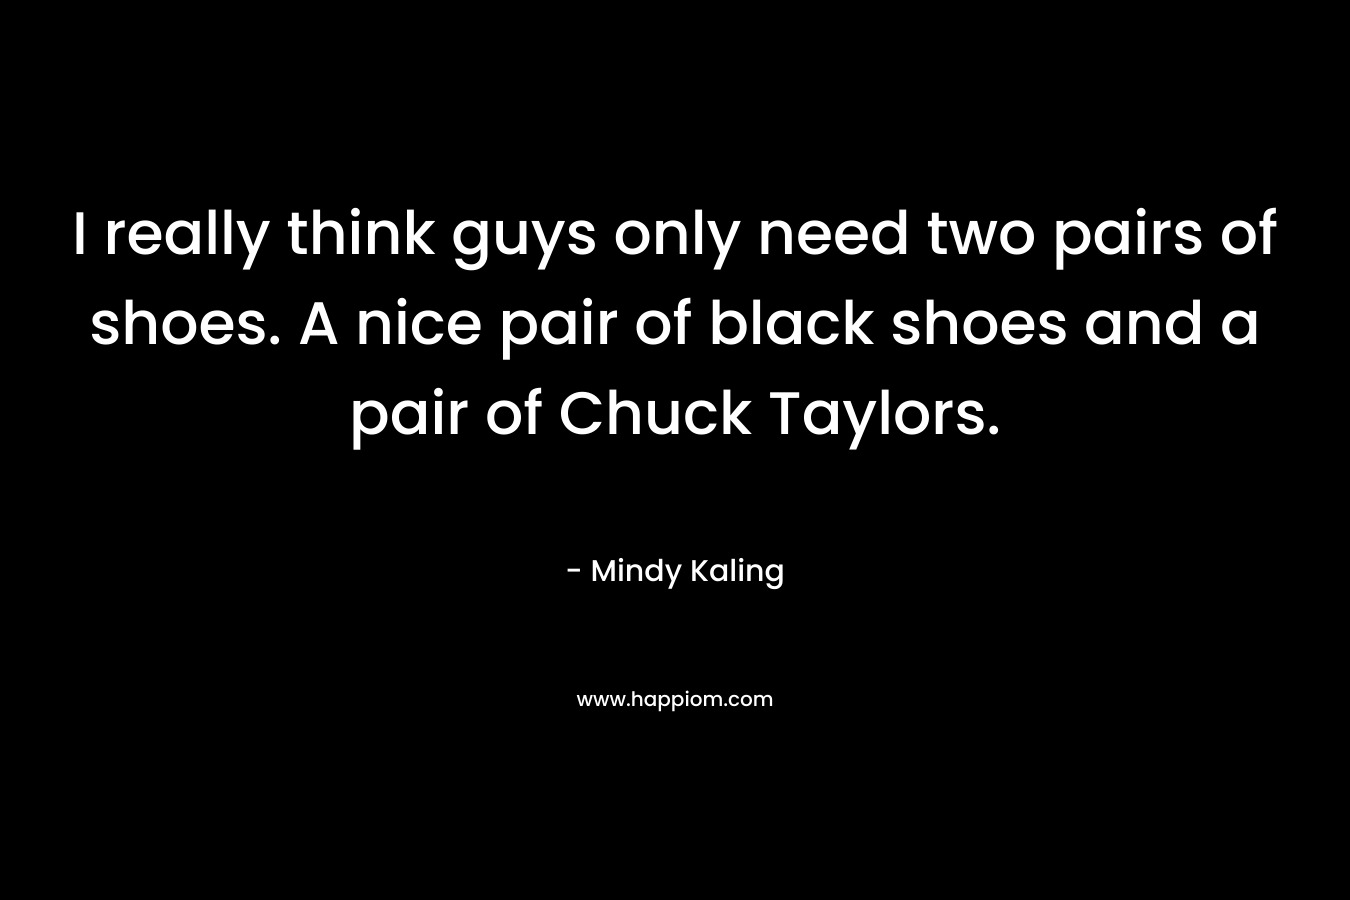 I really think guys only need two pairs of shoes. A nice pair of black shoes and a pair of Chuck Taylors.